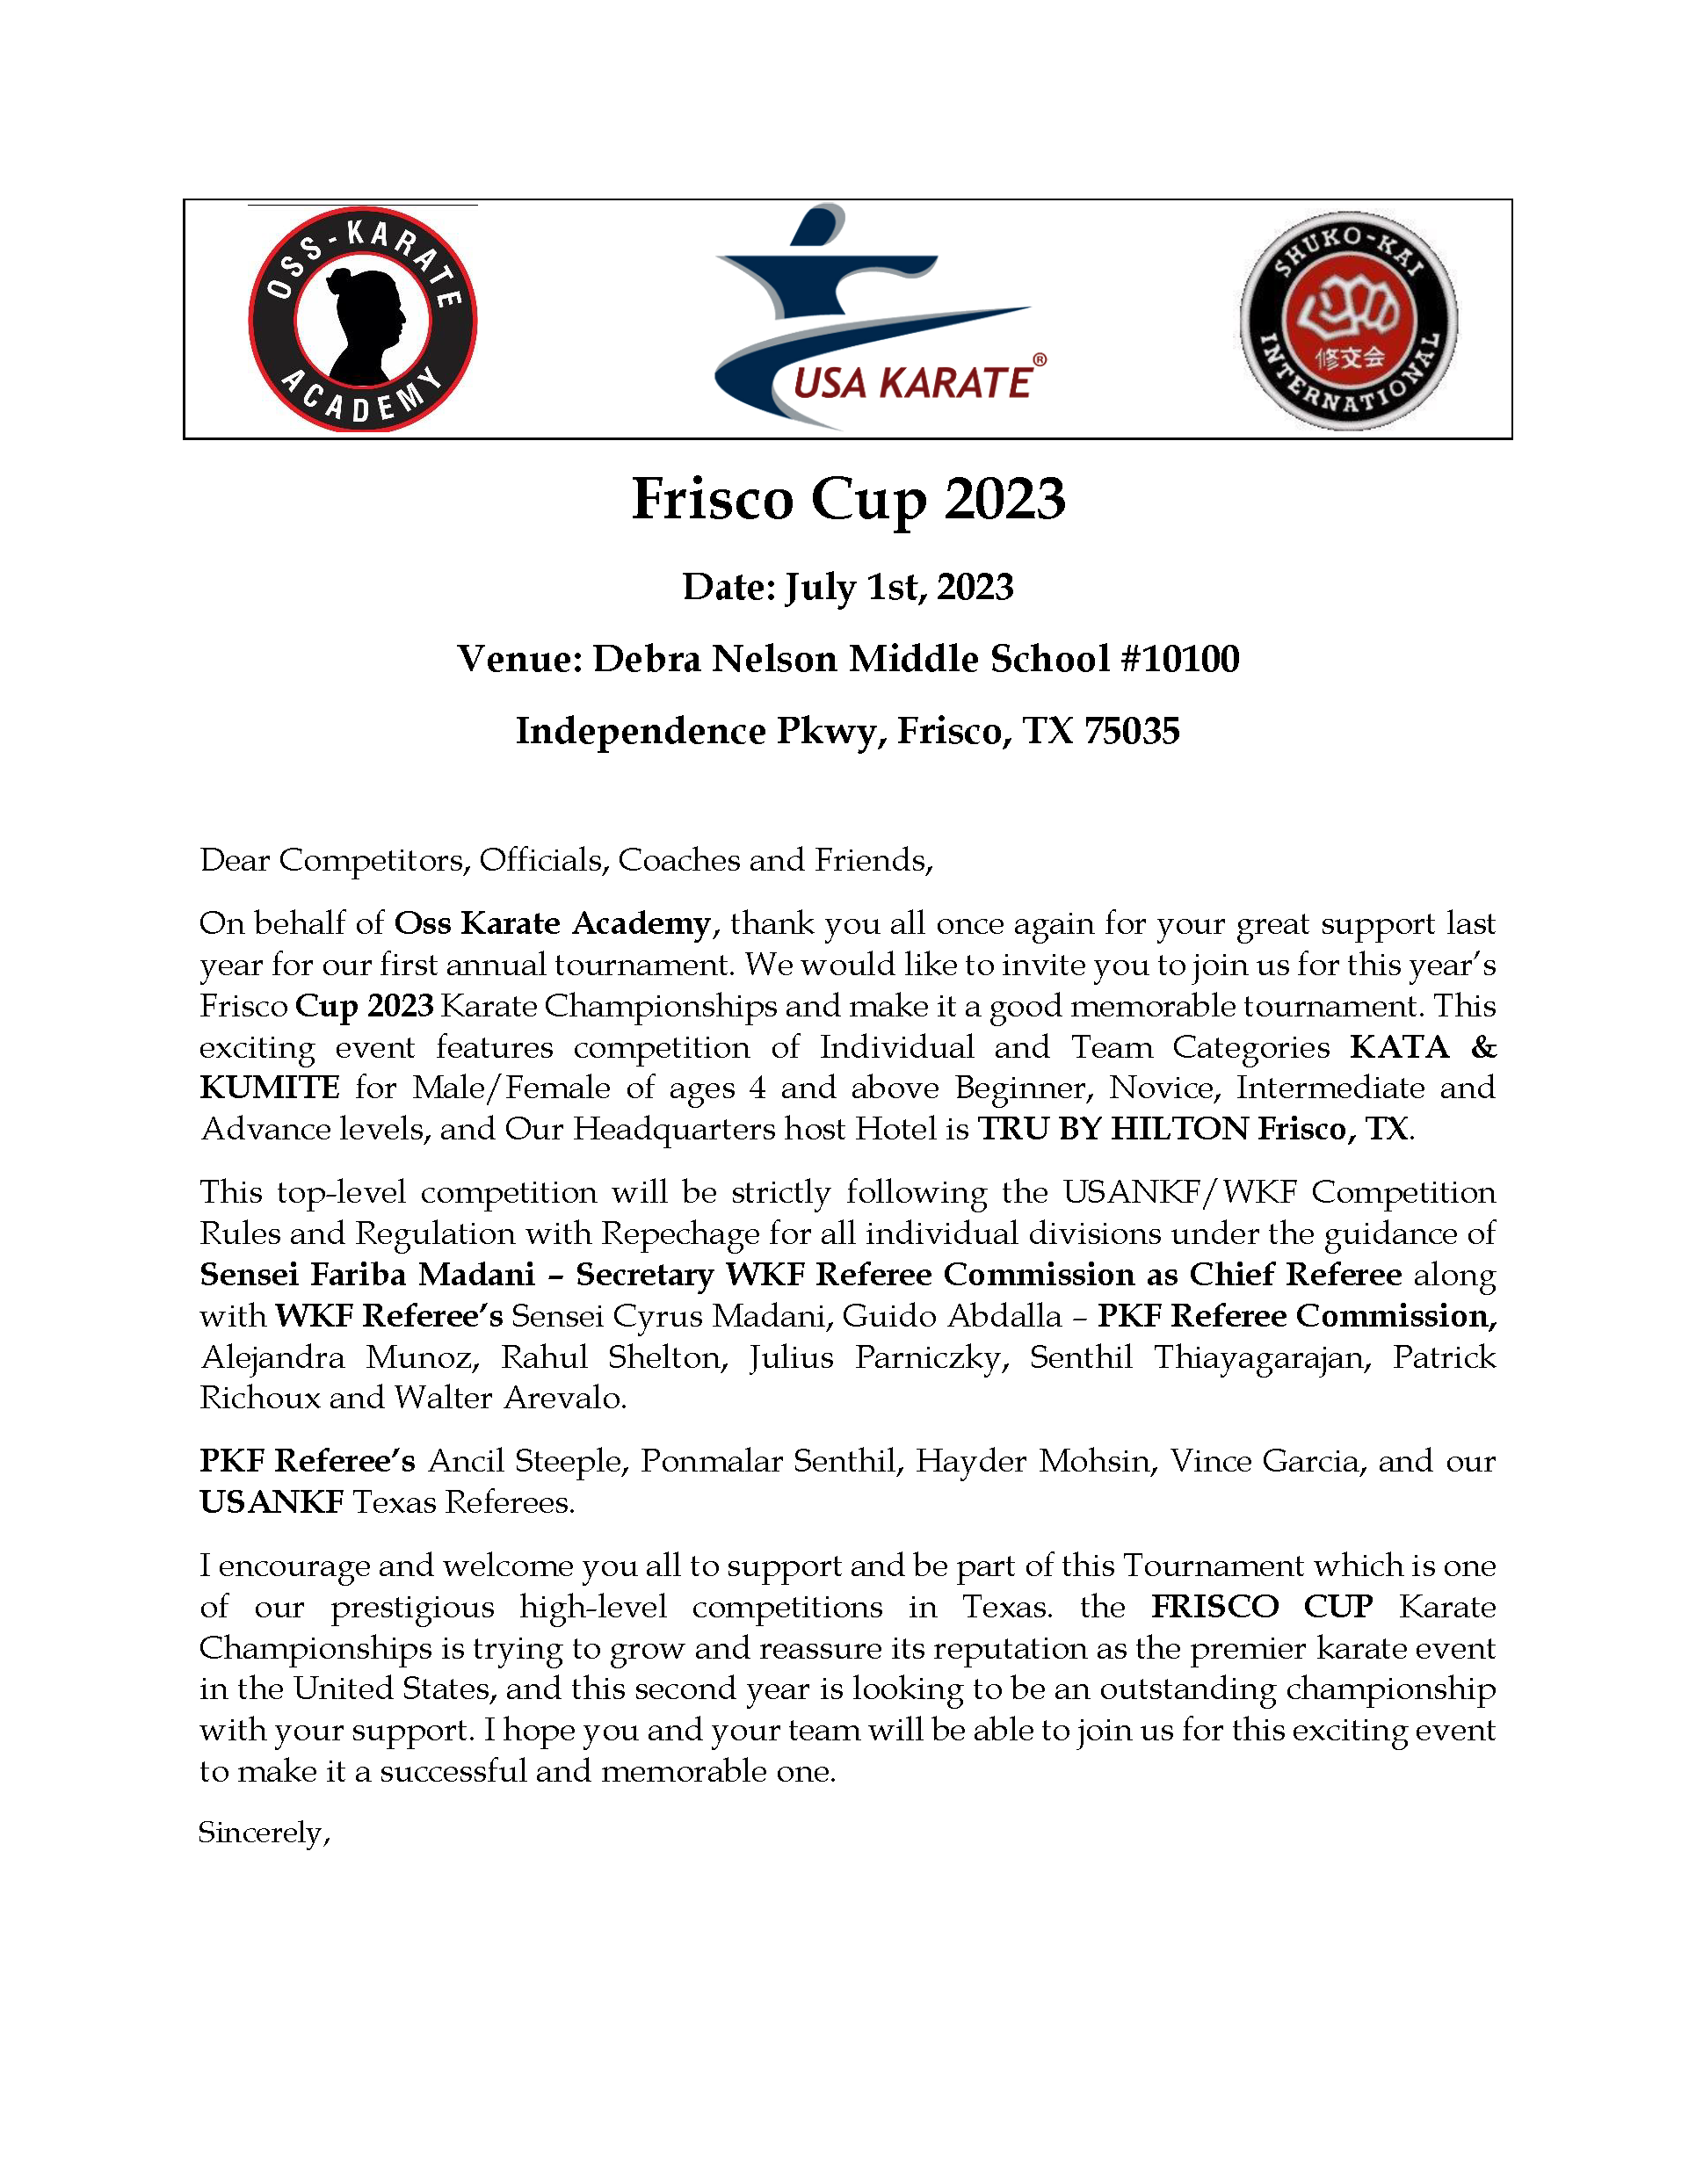 Frisco Cup 2023 Invitation Letter Page 1